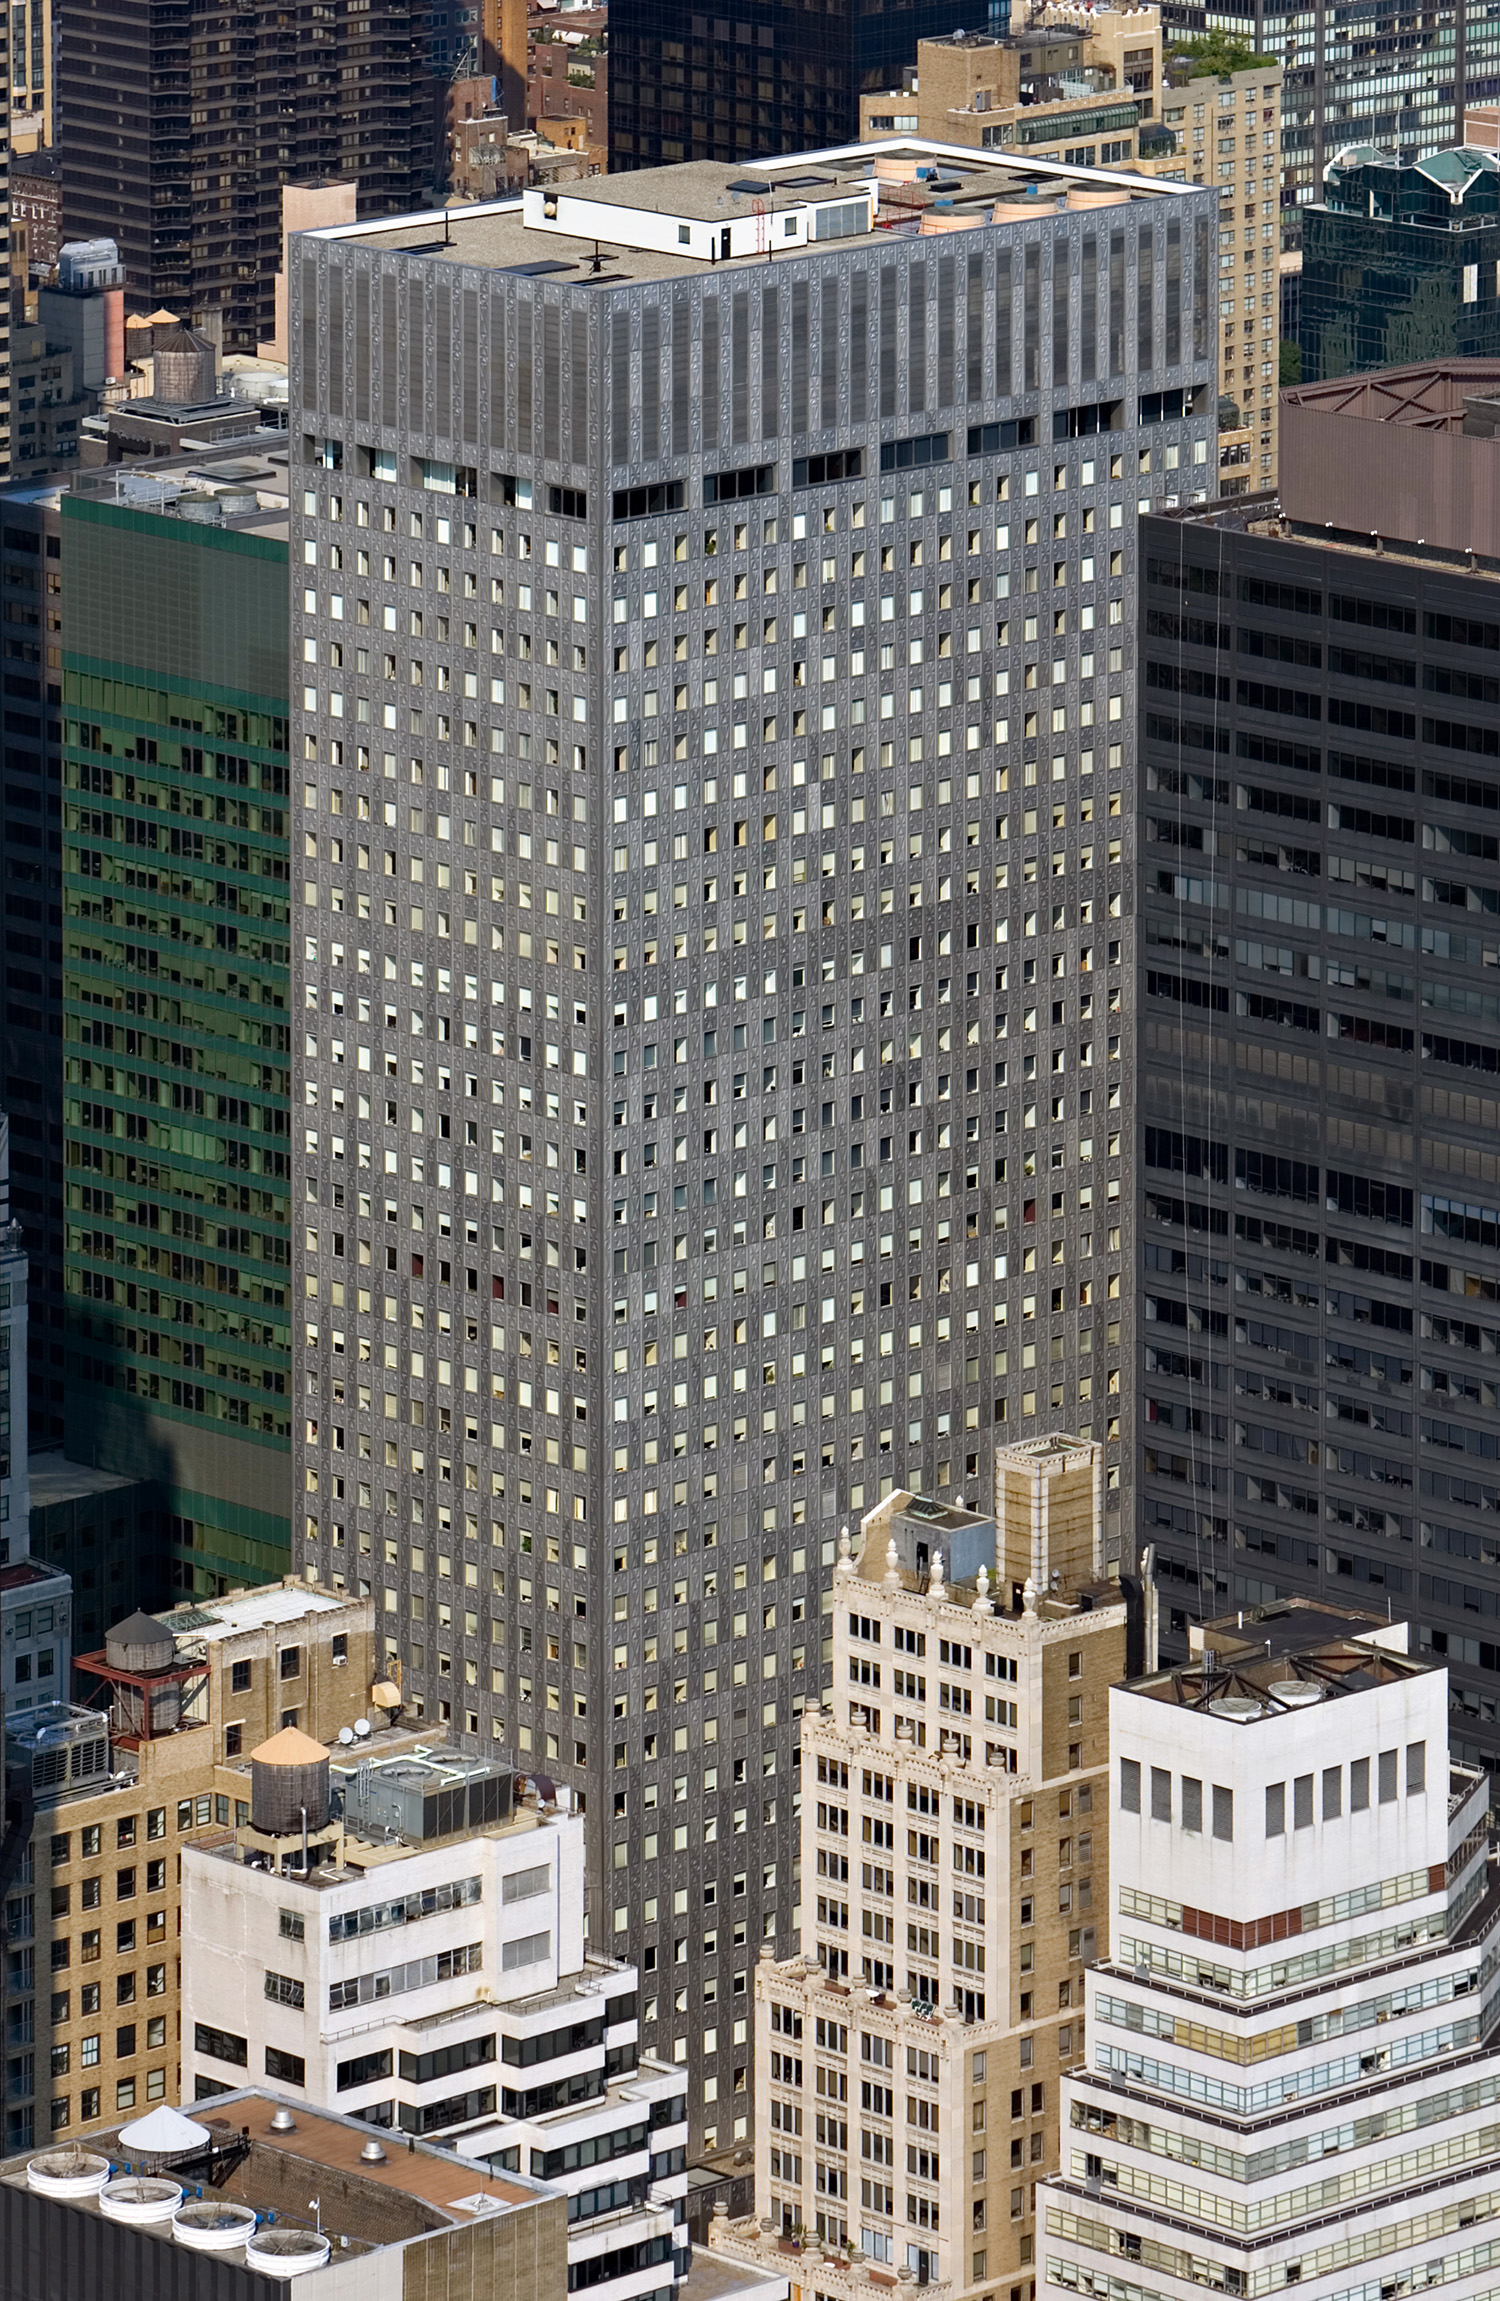 Socony Mobil Building, New York City - View from Empire State Building. © Mathias Beinling